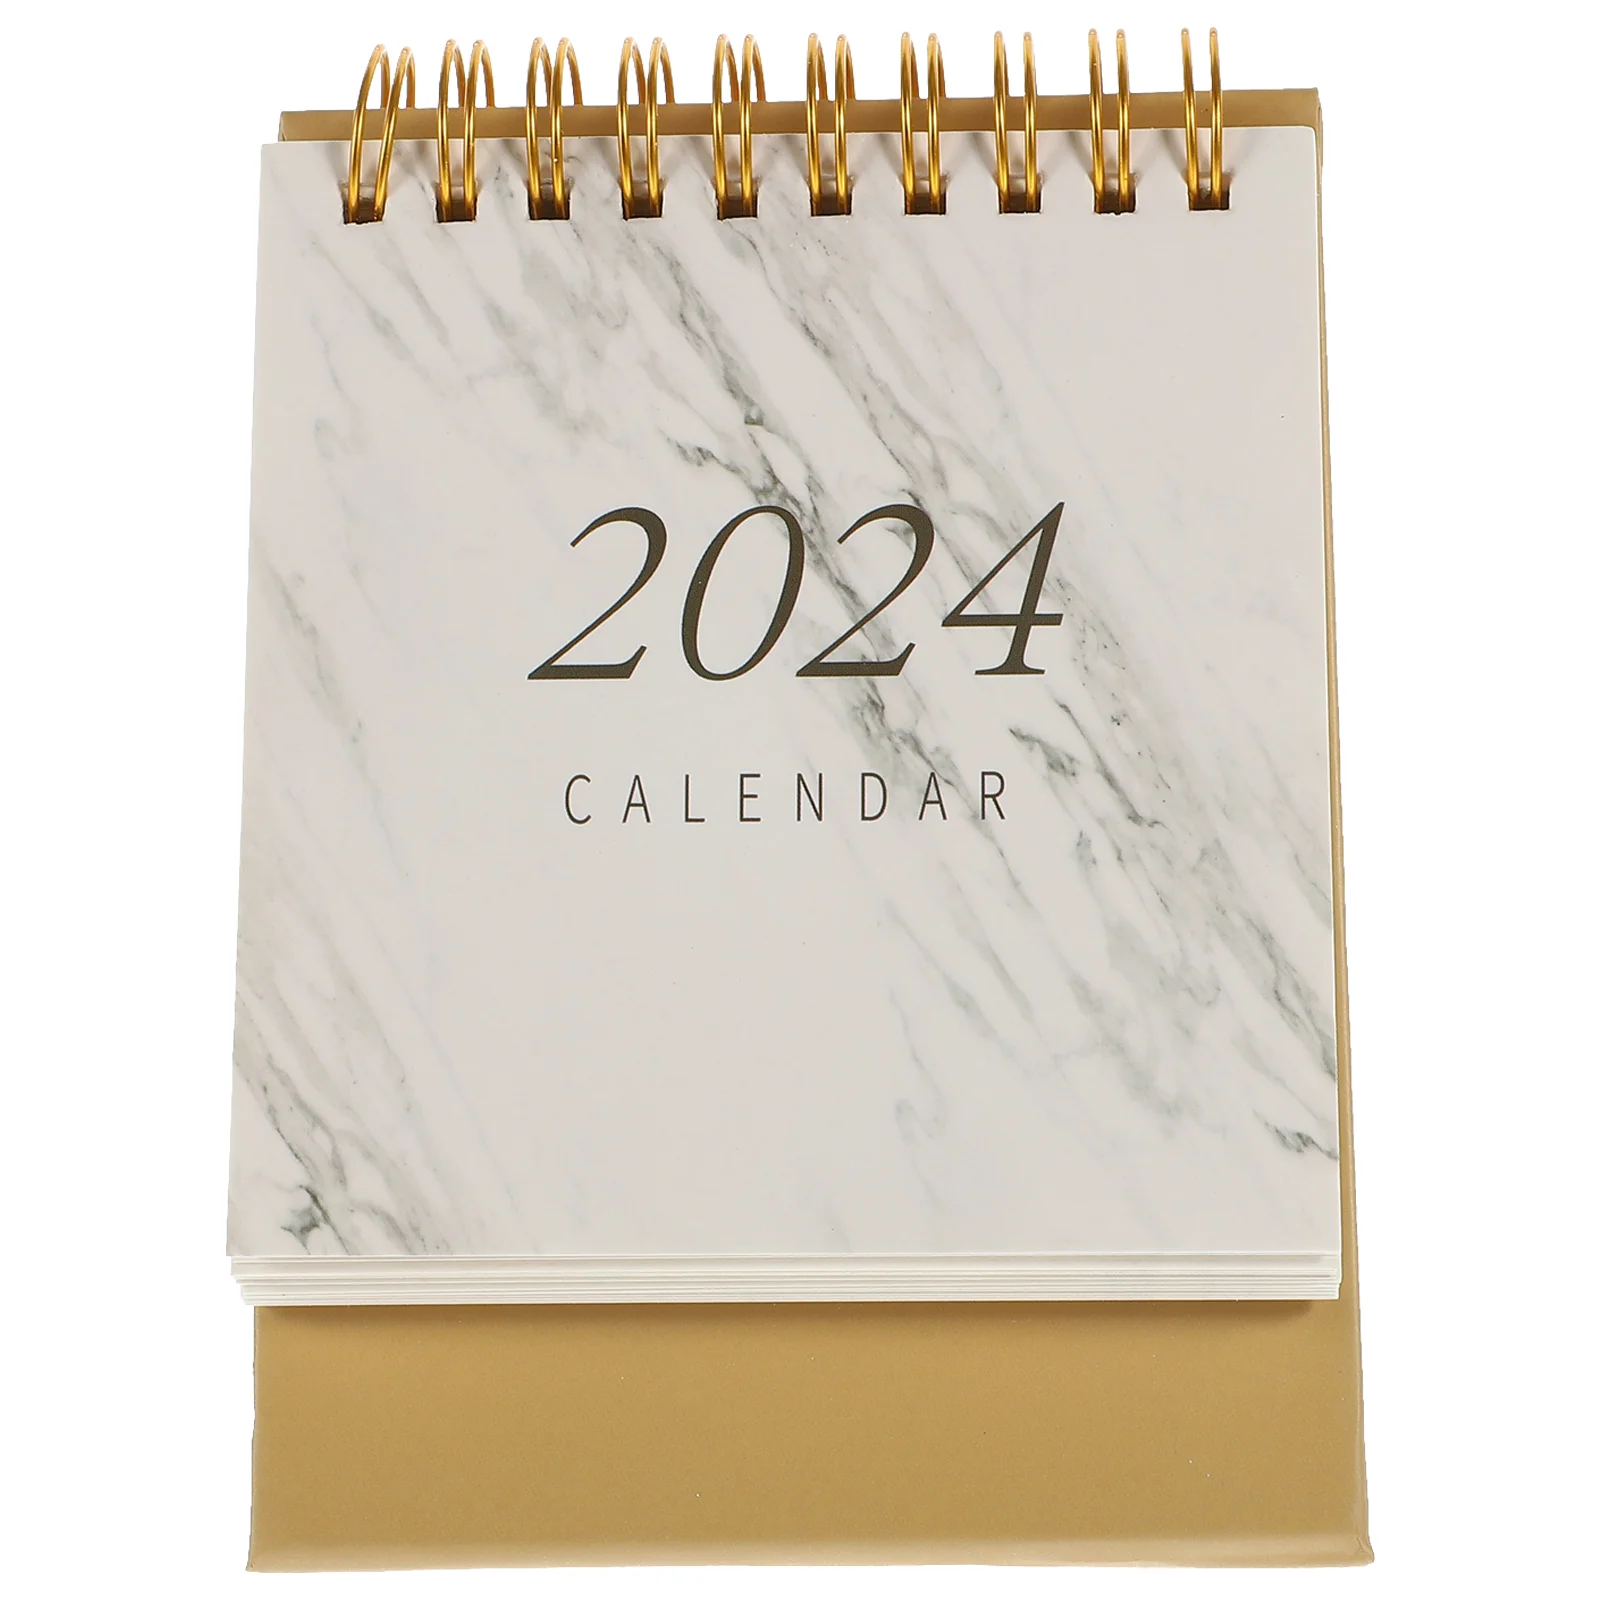 

Calendar Desk Flip Planner Wall Daily Monthly Year Weekly Standing Office Planning Chinese Lunar Calendars New Tabletop Habit